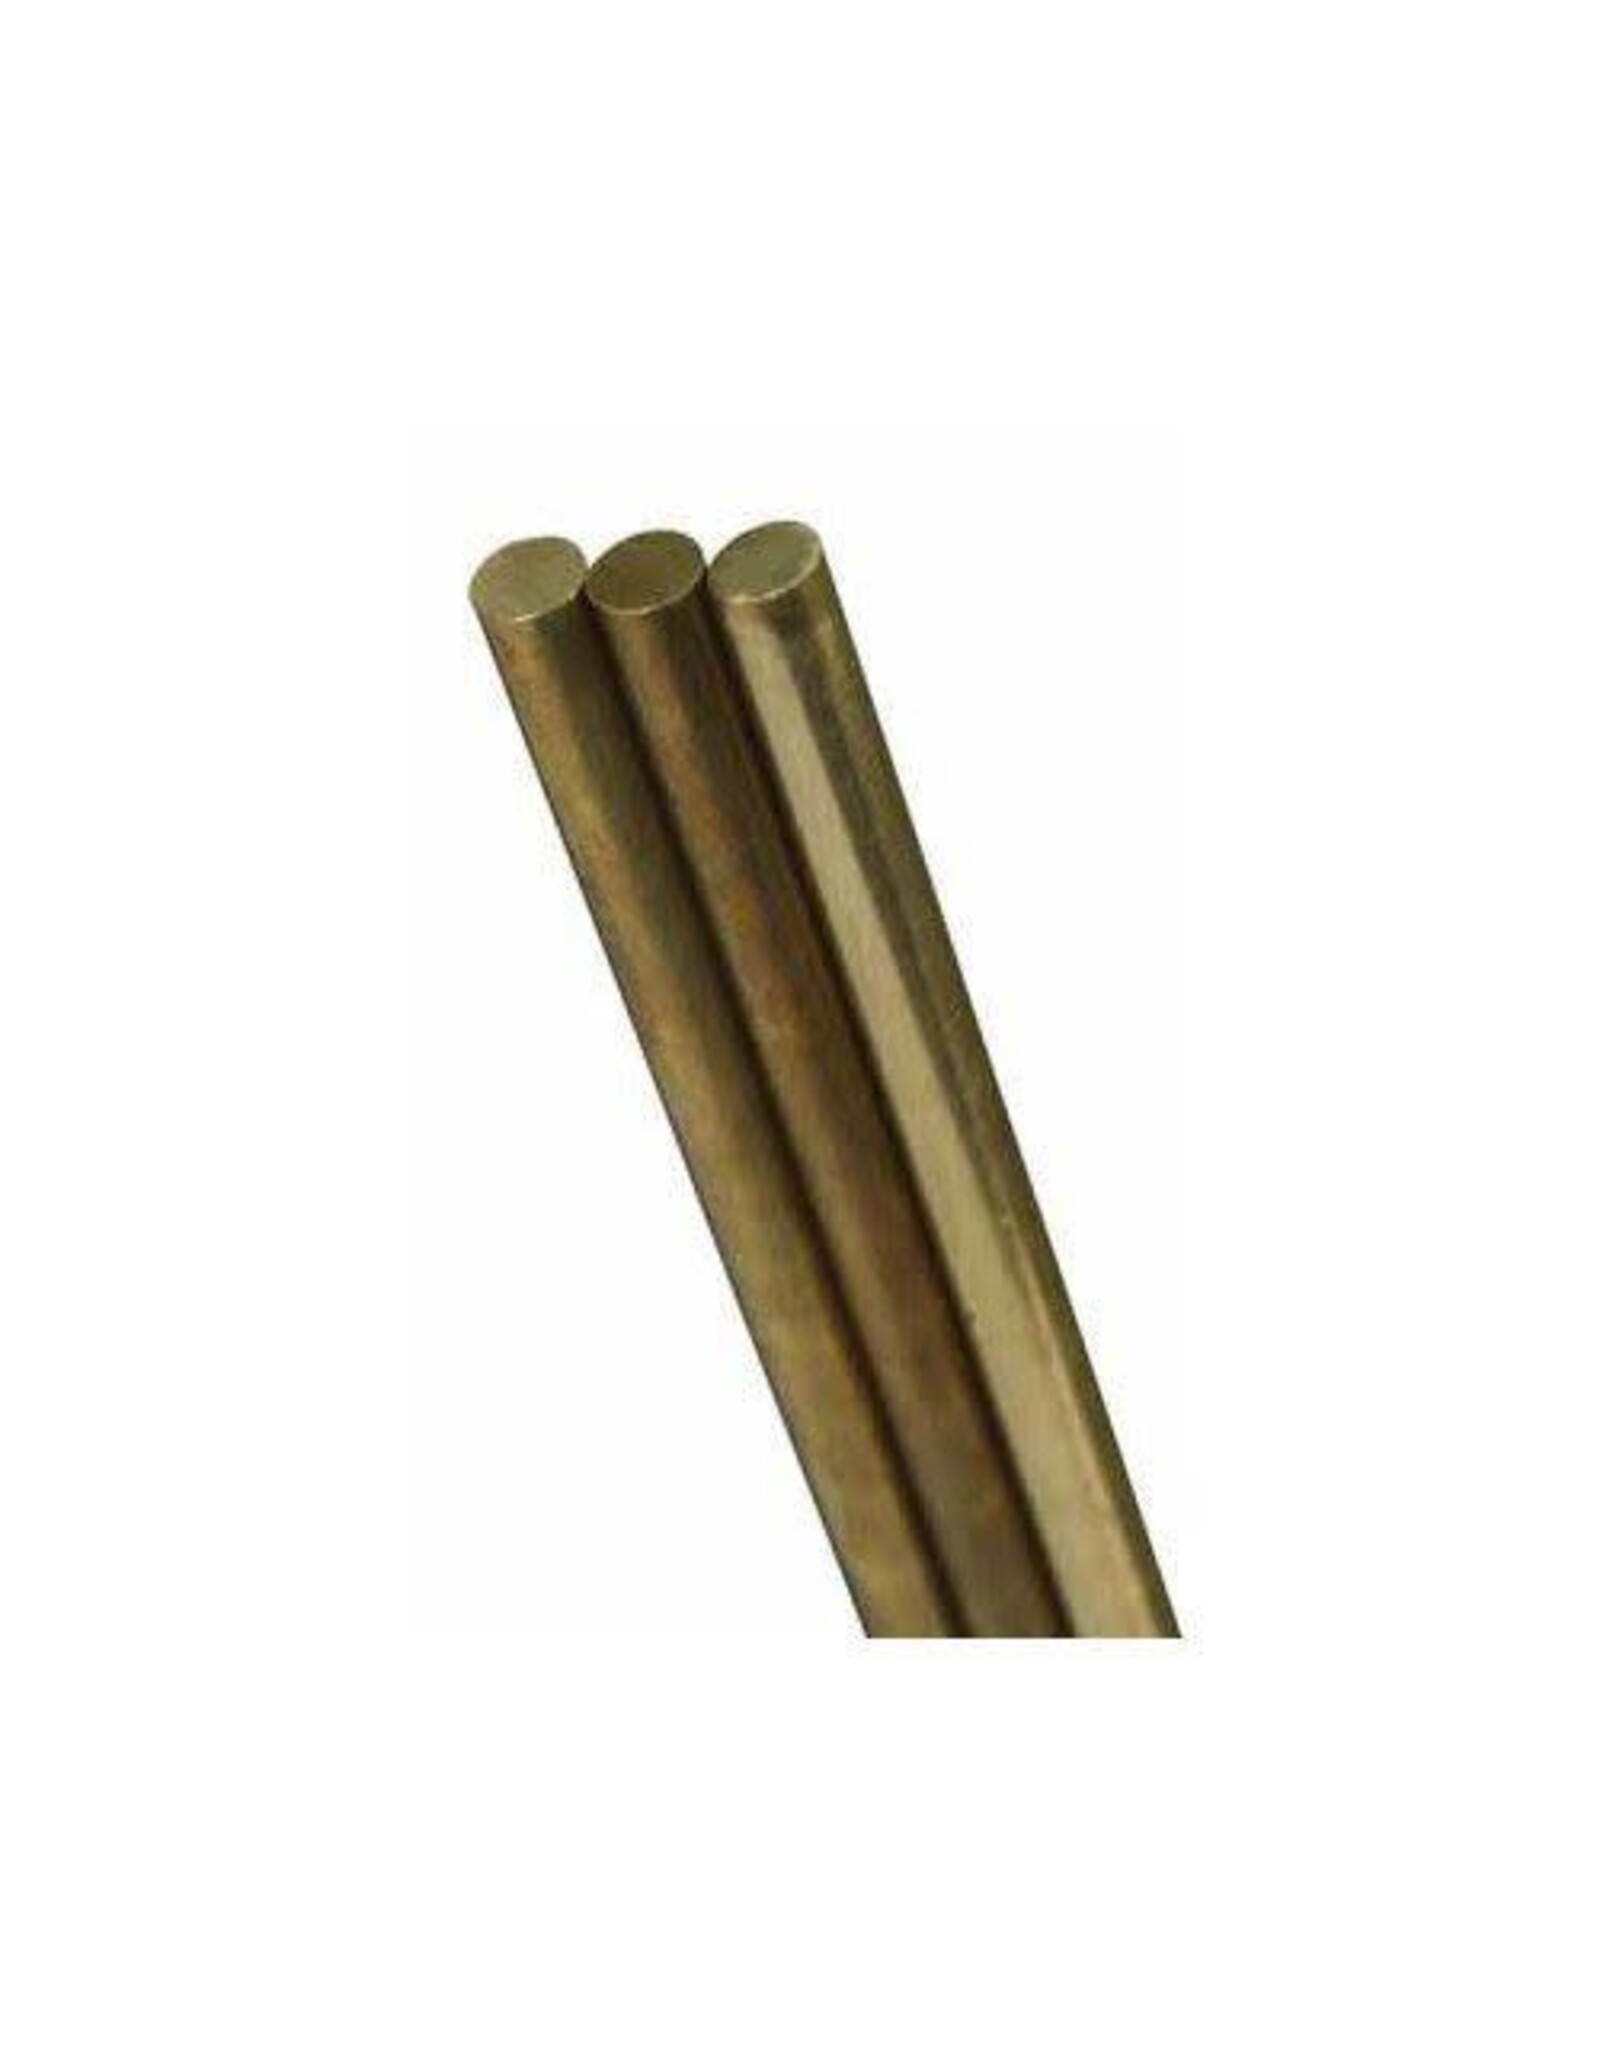 K&S Engeering 3/64" SOLID BRASS ROD (4PCS/CARD)